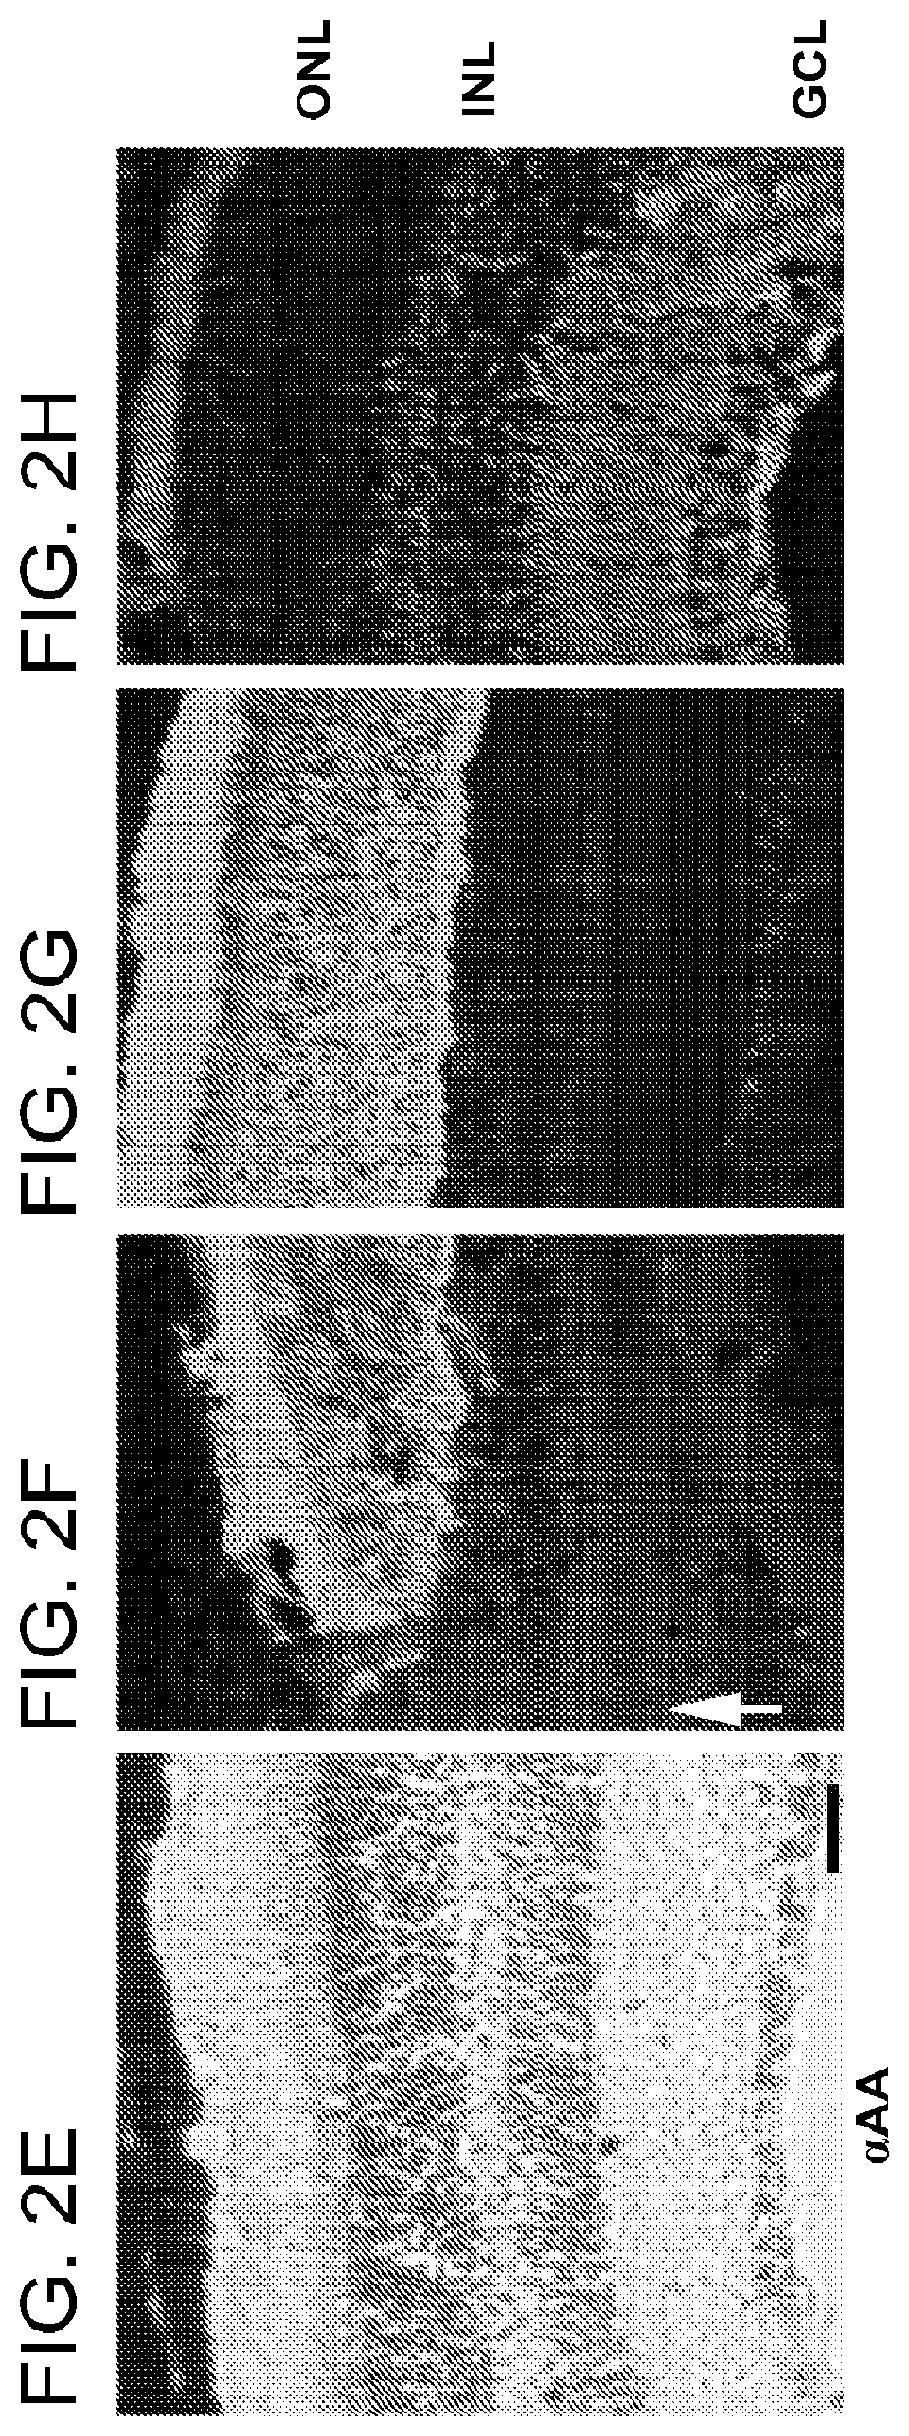 Alpha-aminoadipate for treatment of vision loss and restoring sight